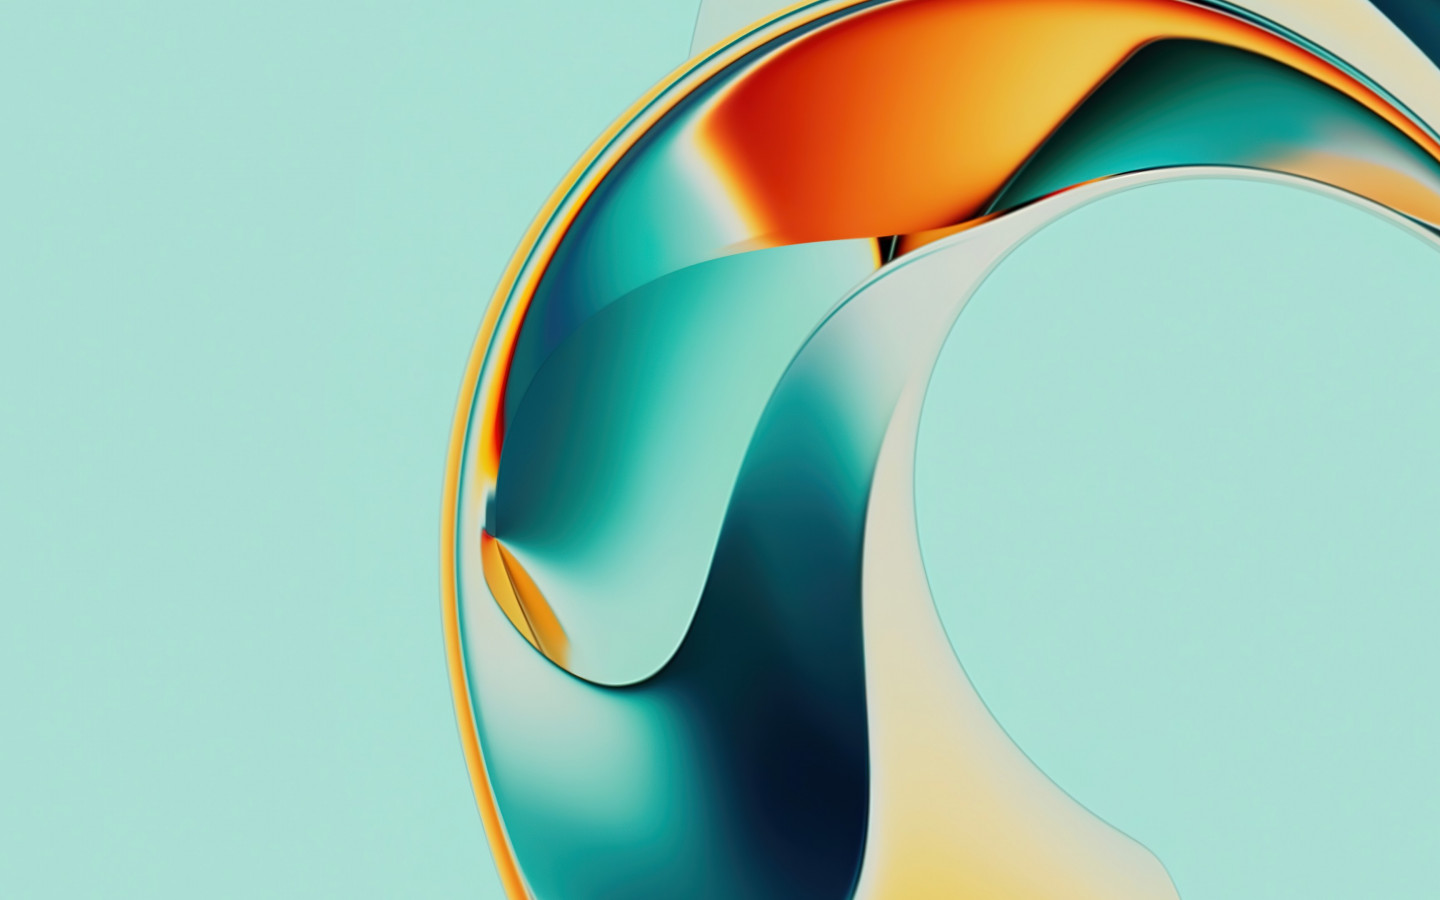 Abstract design in P60 Pro wallpaper 1440x900